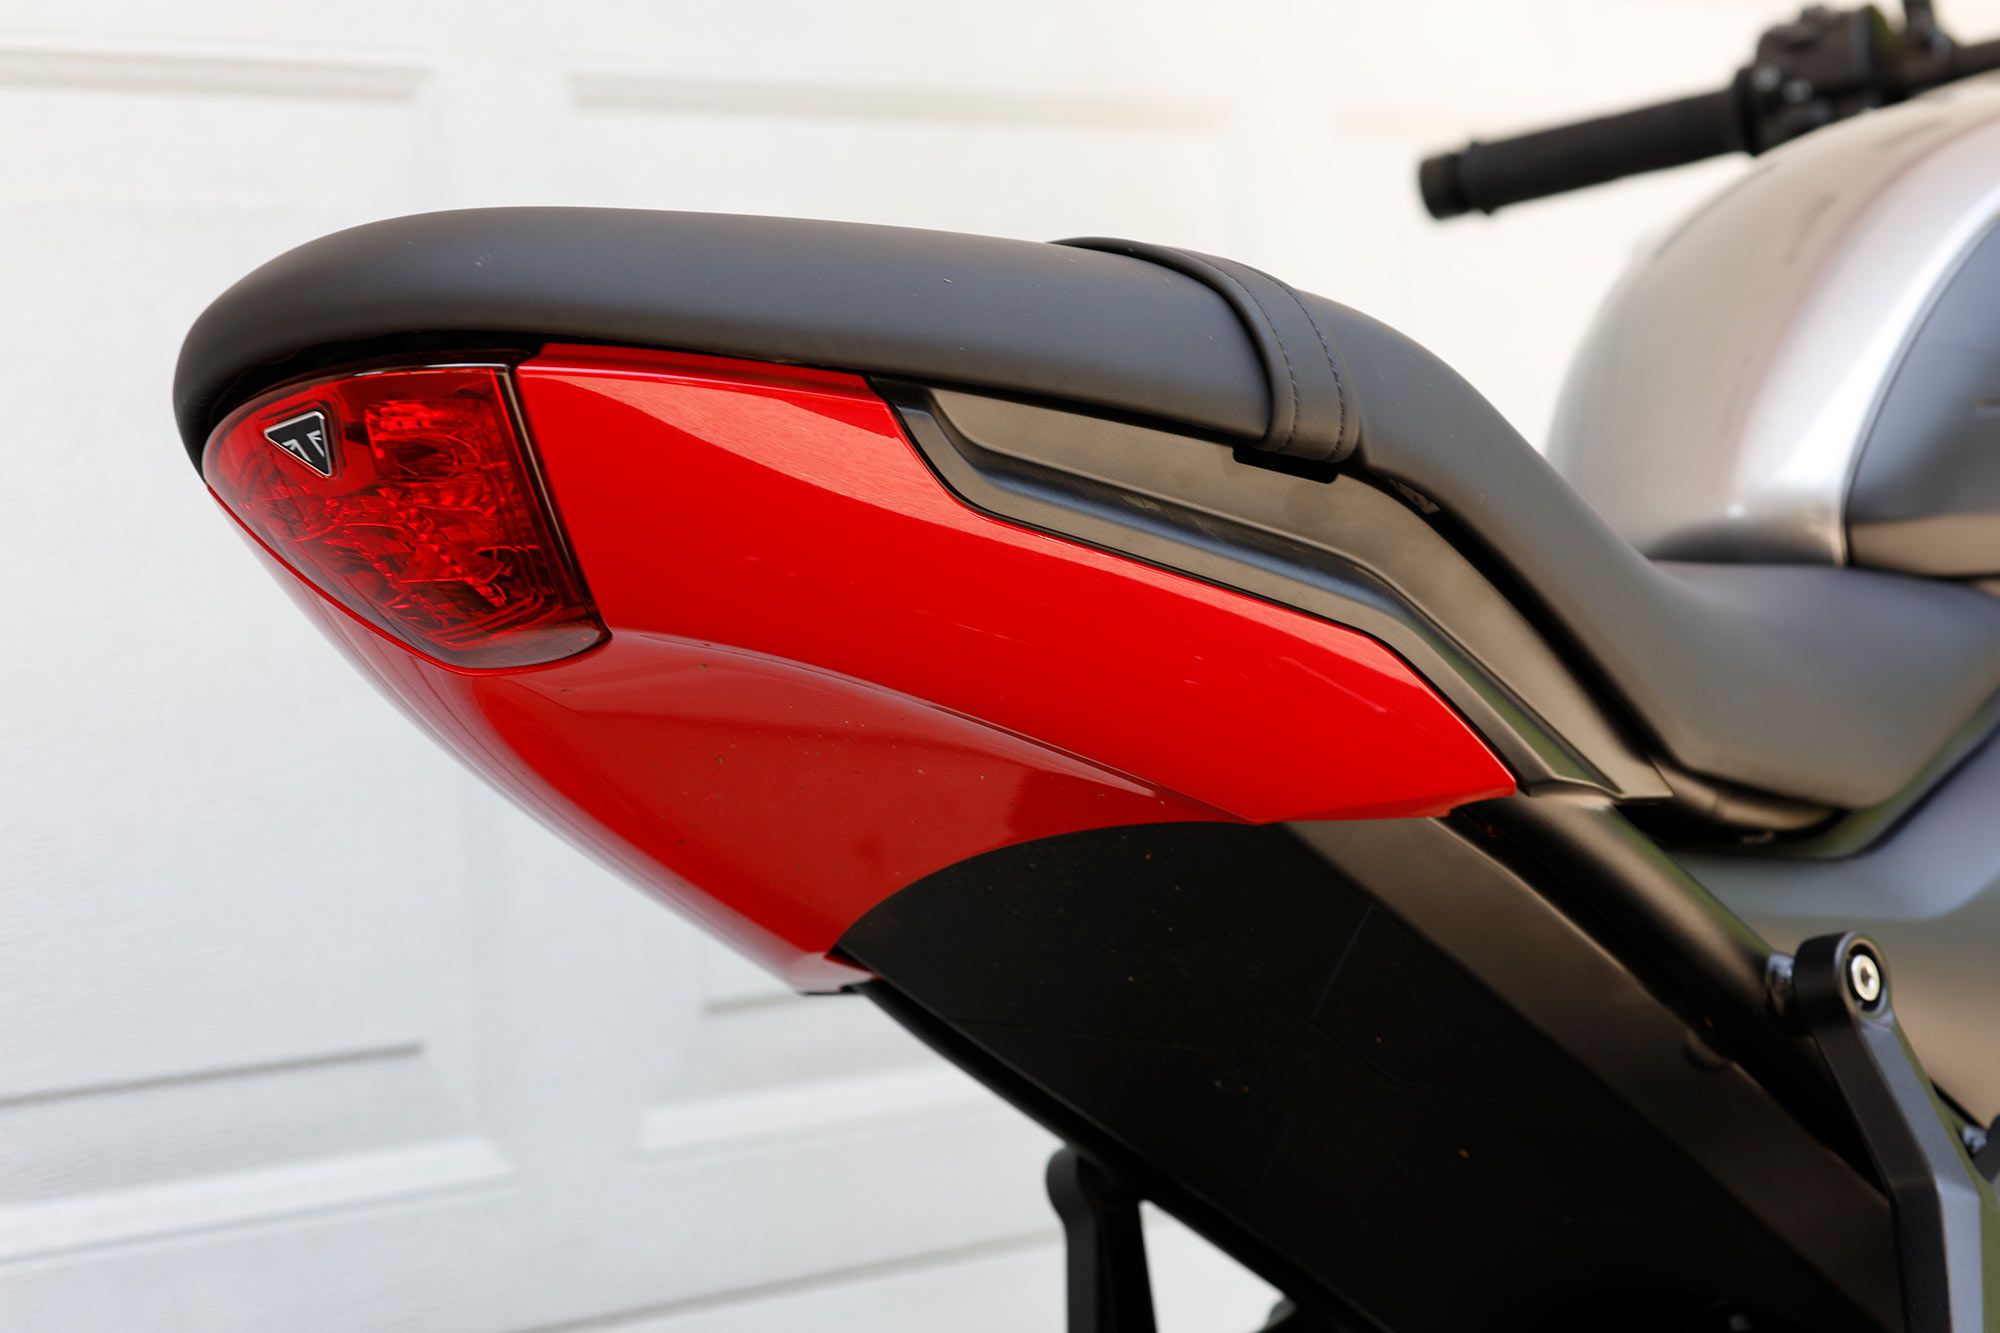 We love the clean, uncluttered look of the Trident’s tail section.